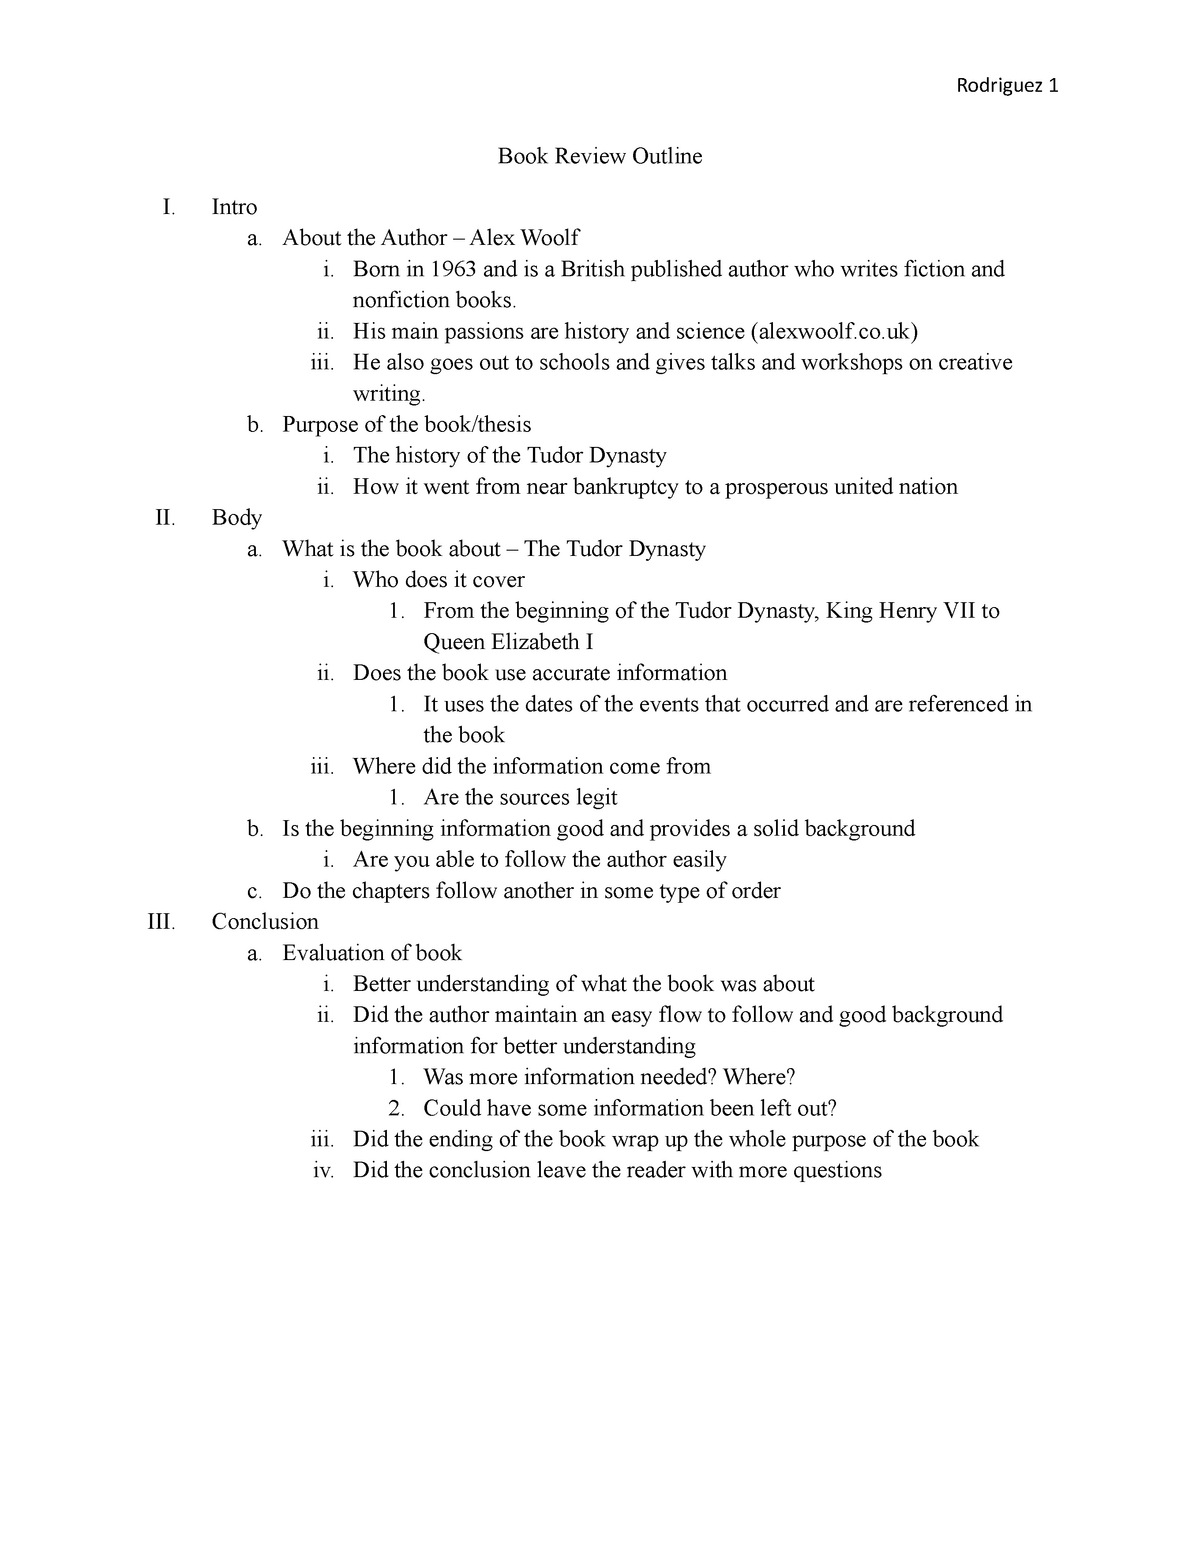 book review outline college level